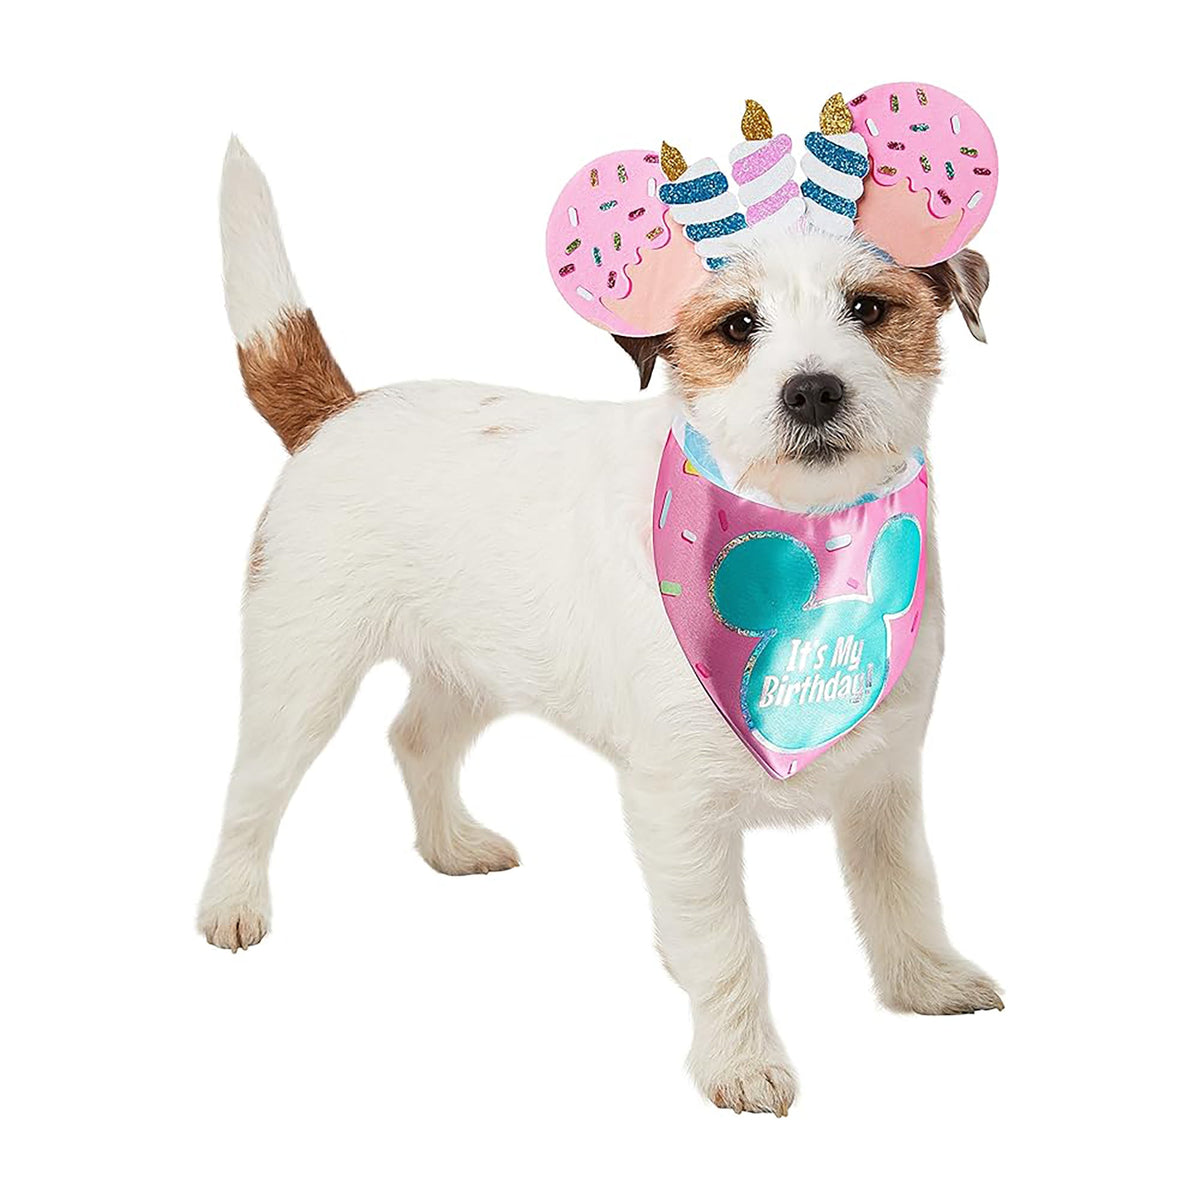 RUBIES II (Ruby Slipper Sales) Costume Accessories Disney Minnie Mouse Ears and Bandana Birthday Set for Pets 195884019337